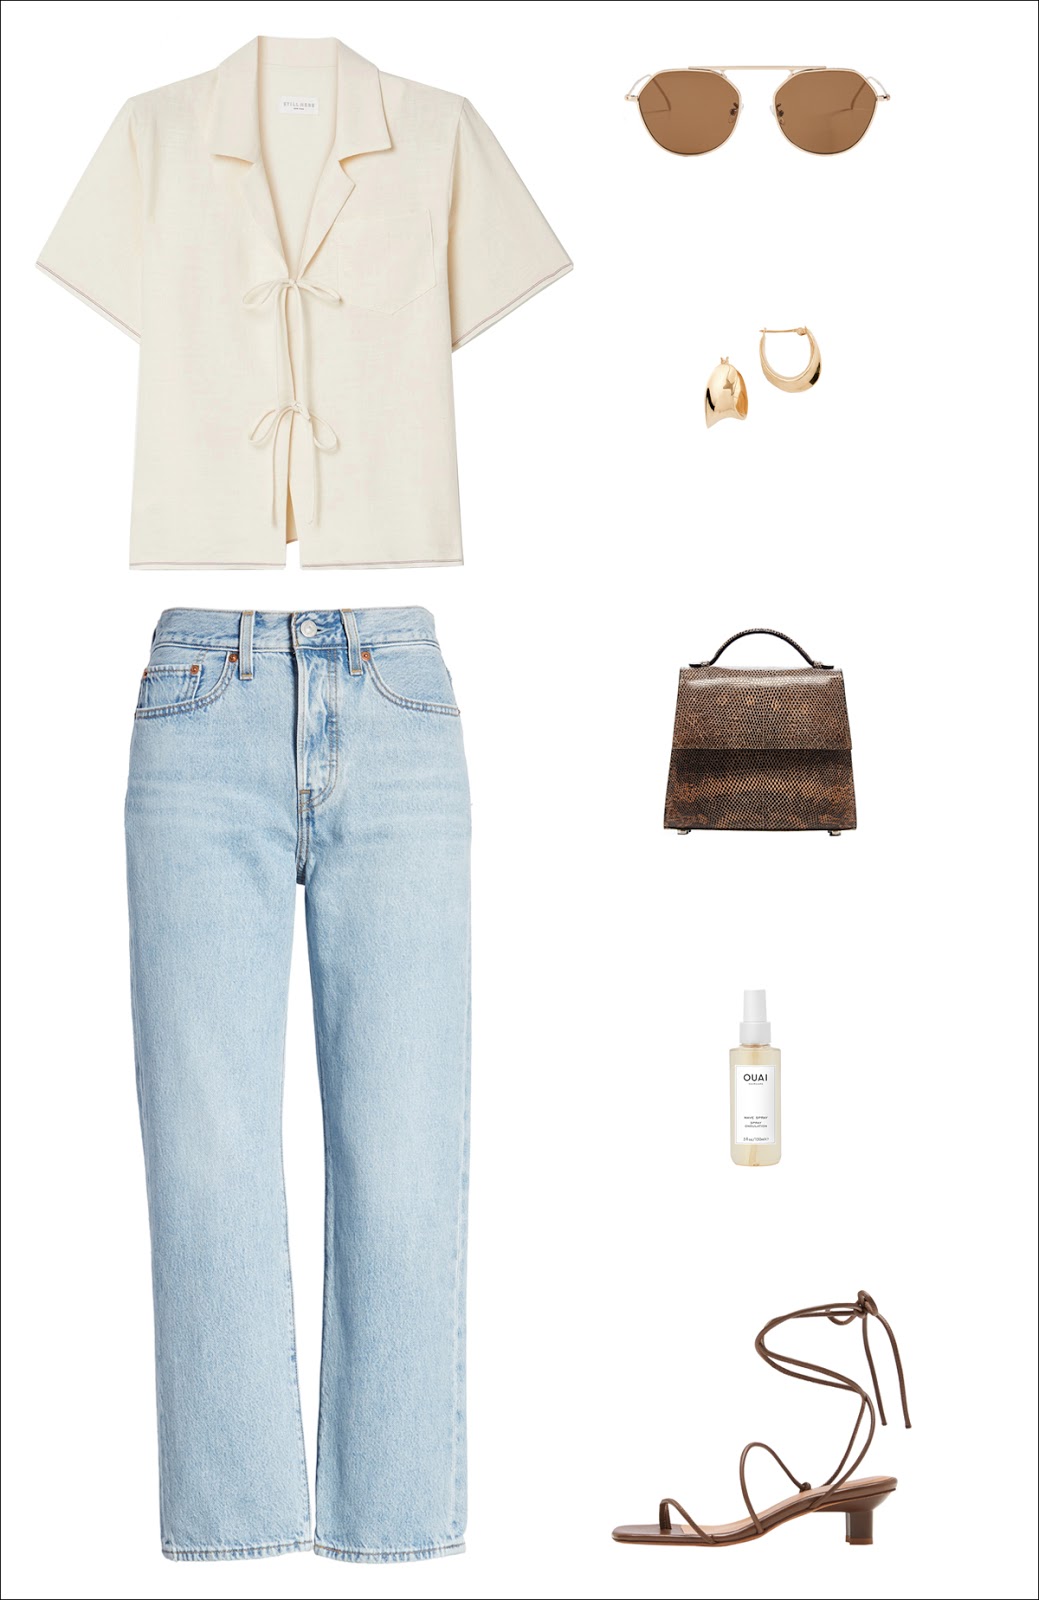 Casual-Chic Denim Outfit for Summer and Fall — standout shirt, metal-rim sunglasses, chunky hoop earrings, a cool mini bag, classic straight-leg jeans, and ankle-wrap sandals